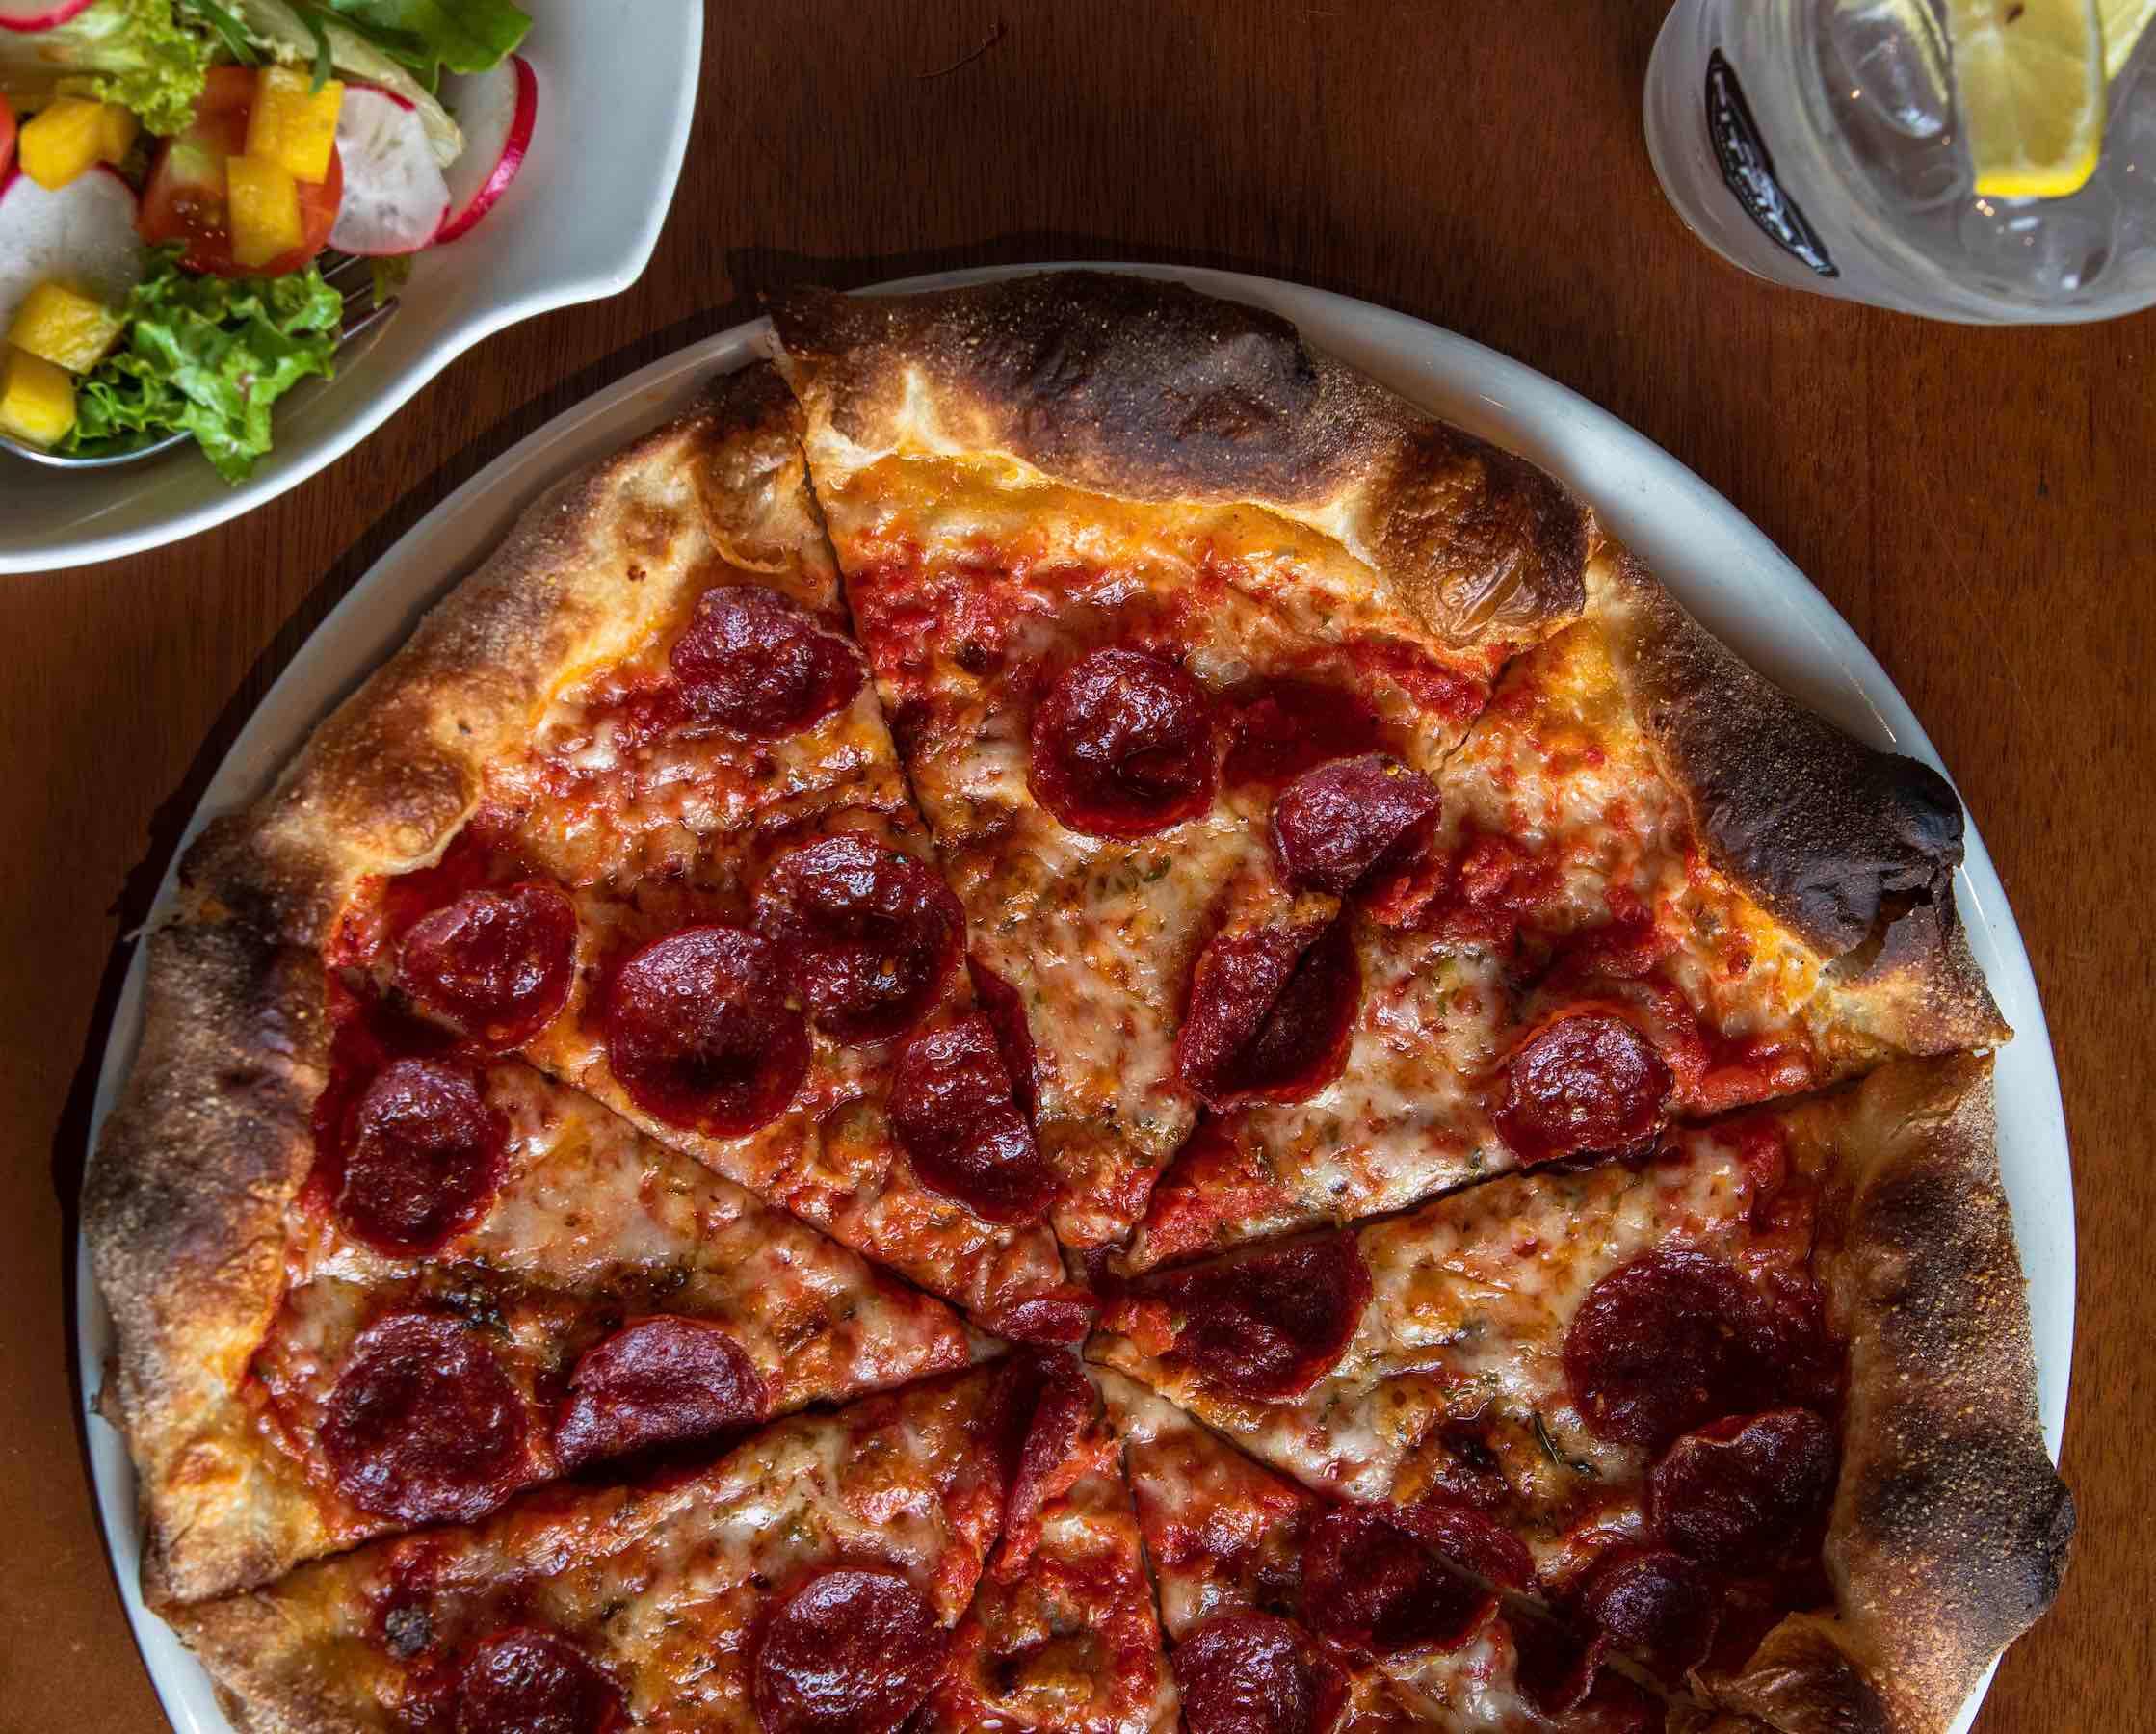 Pitfire brings its artisan pizza to Mirdif Hills